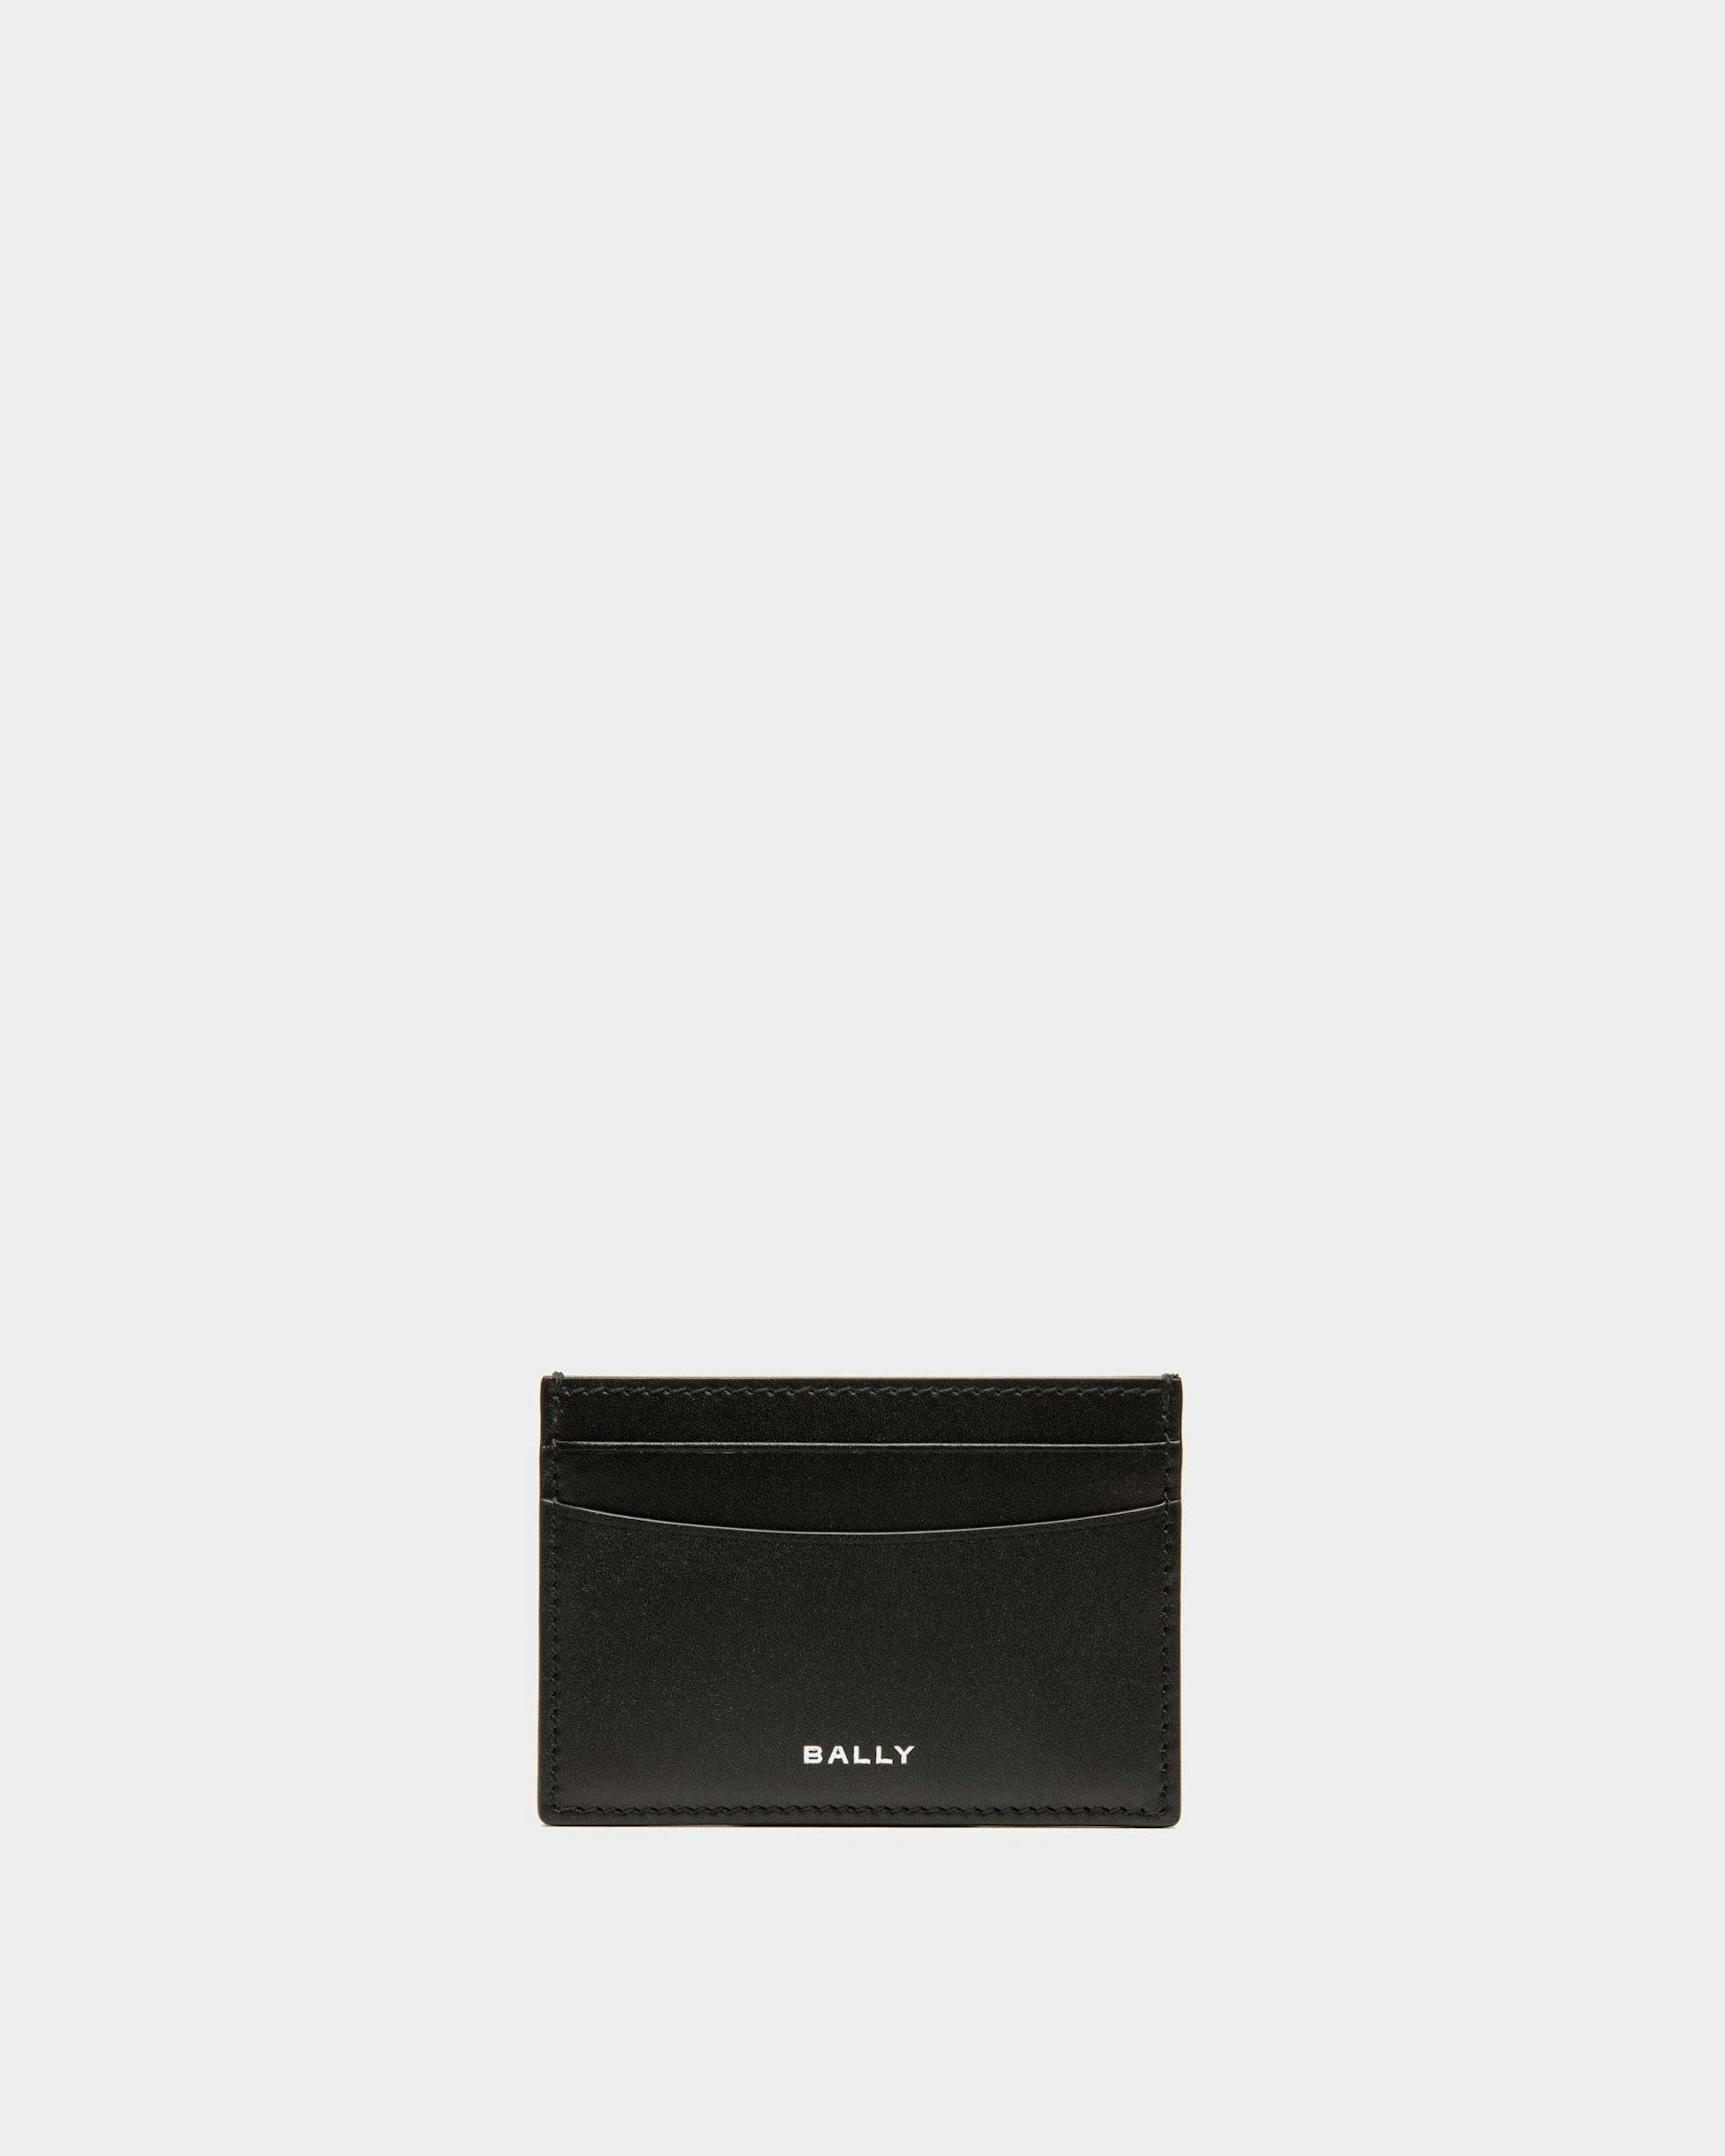 Men's Busy Bally Card Holder in Black Leather | Bally | Still Life Front